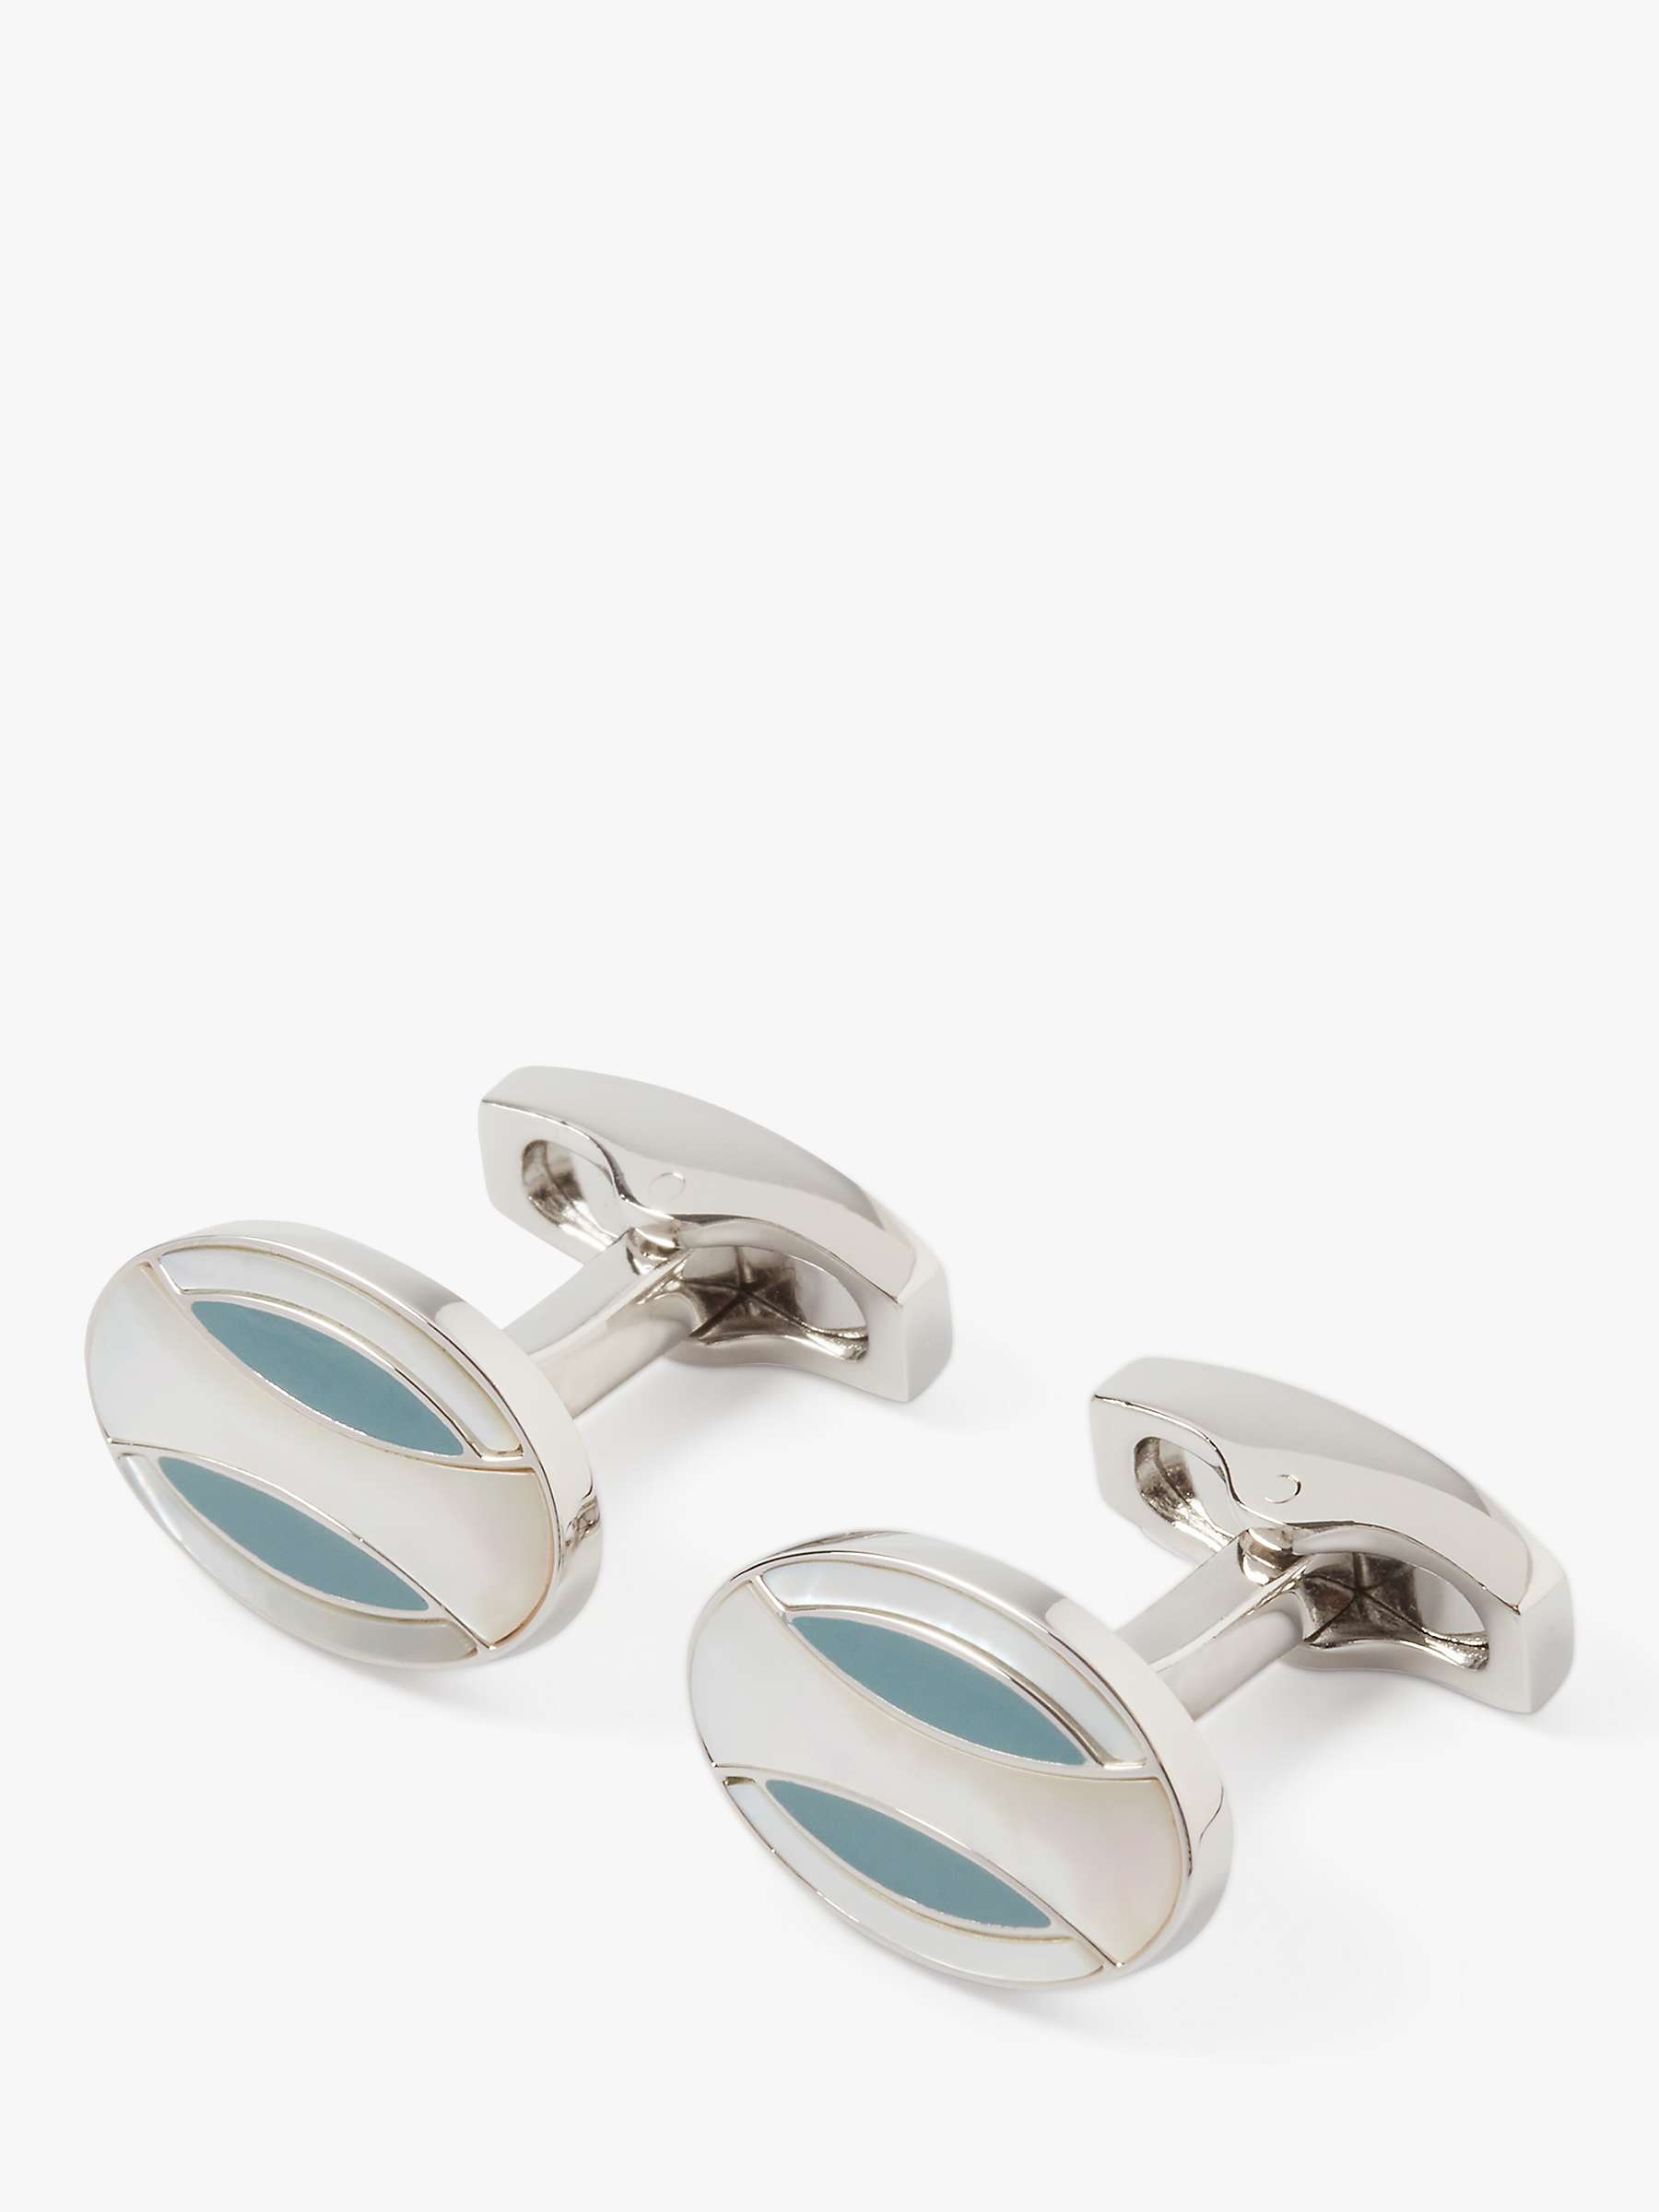 Buy Simon Carter Deco Curve Mother Of Pearl Cufflinks, White Silver Online at johnlewis.com